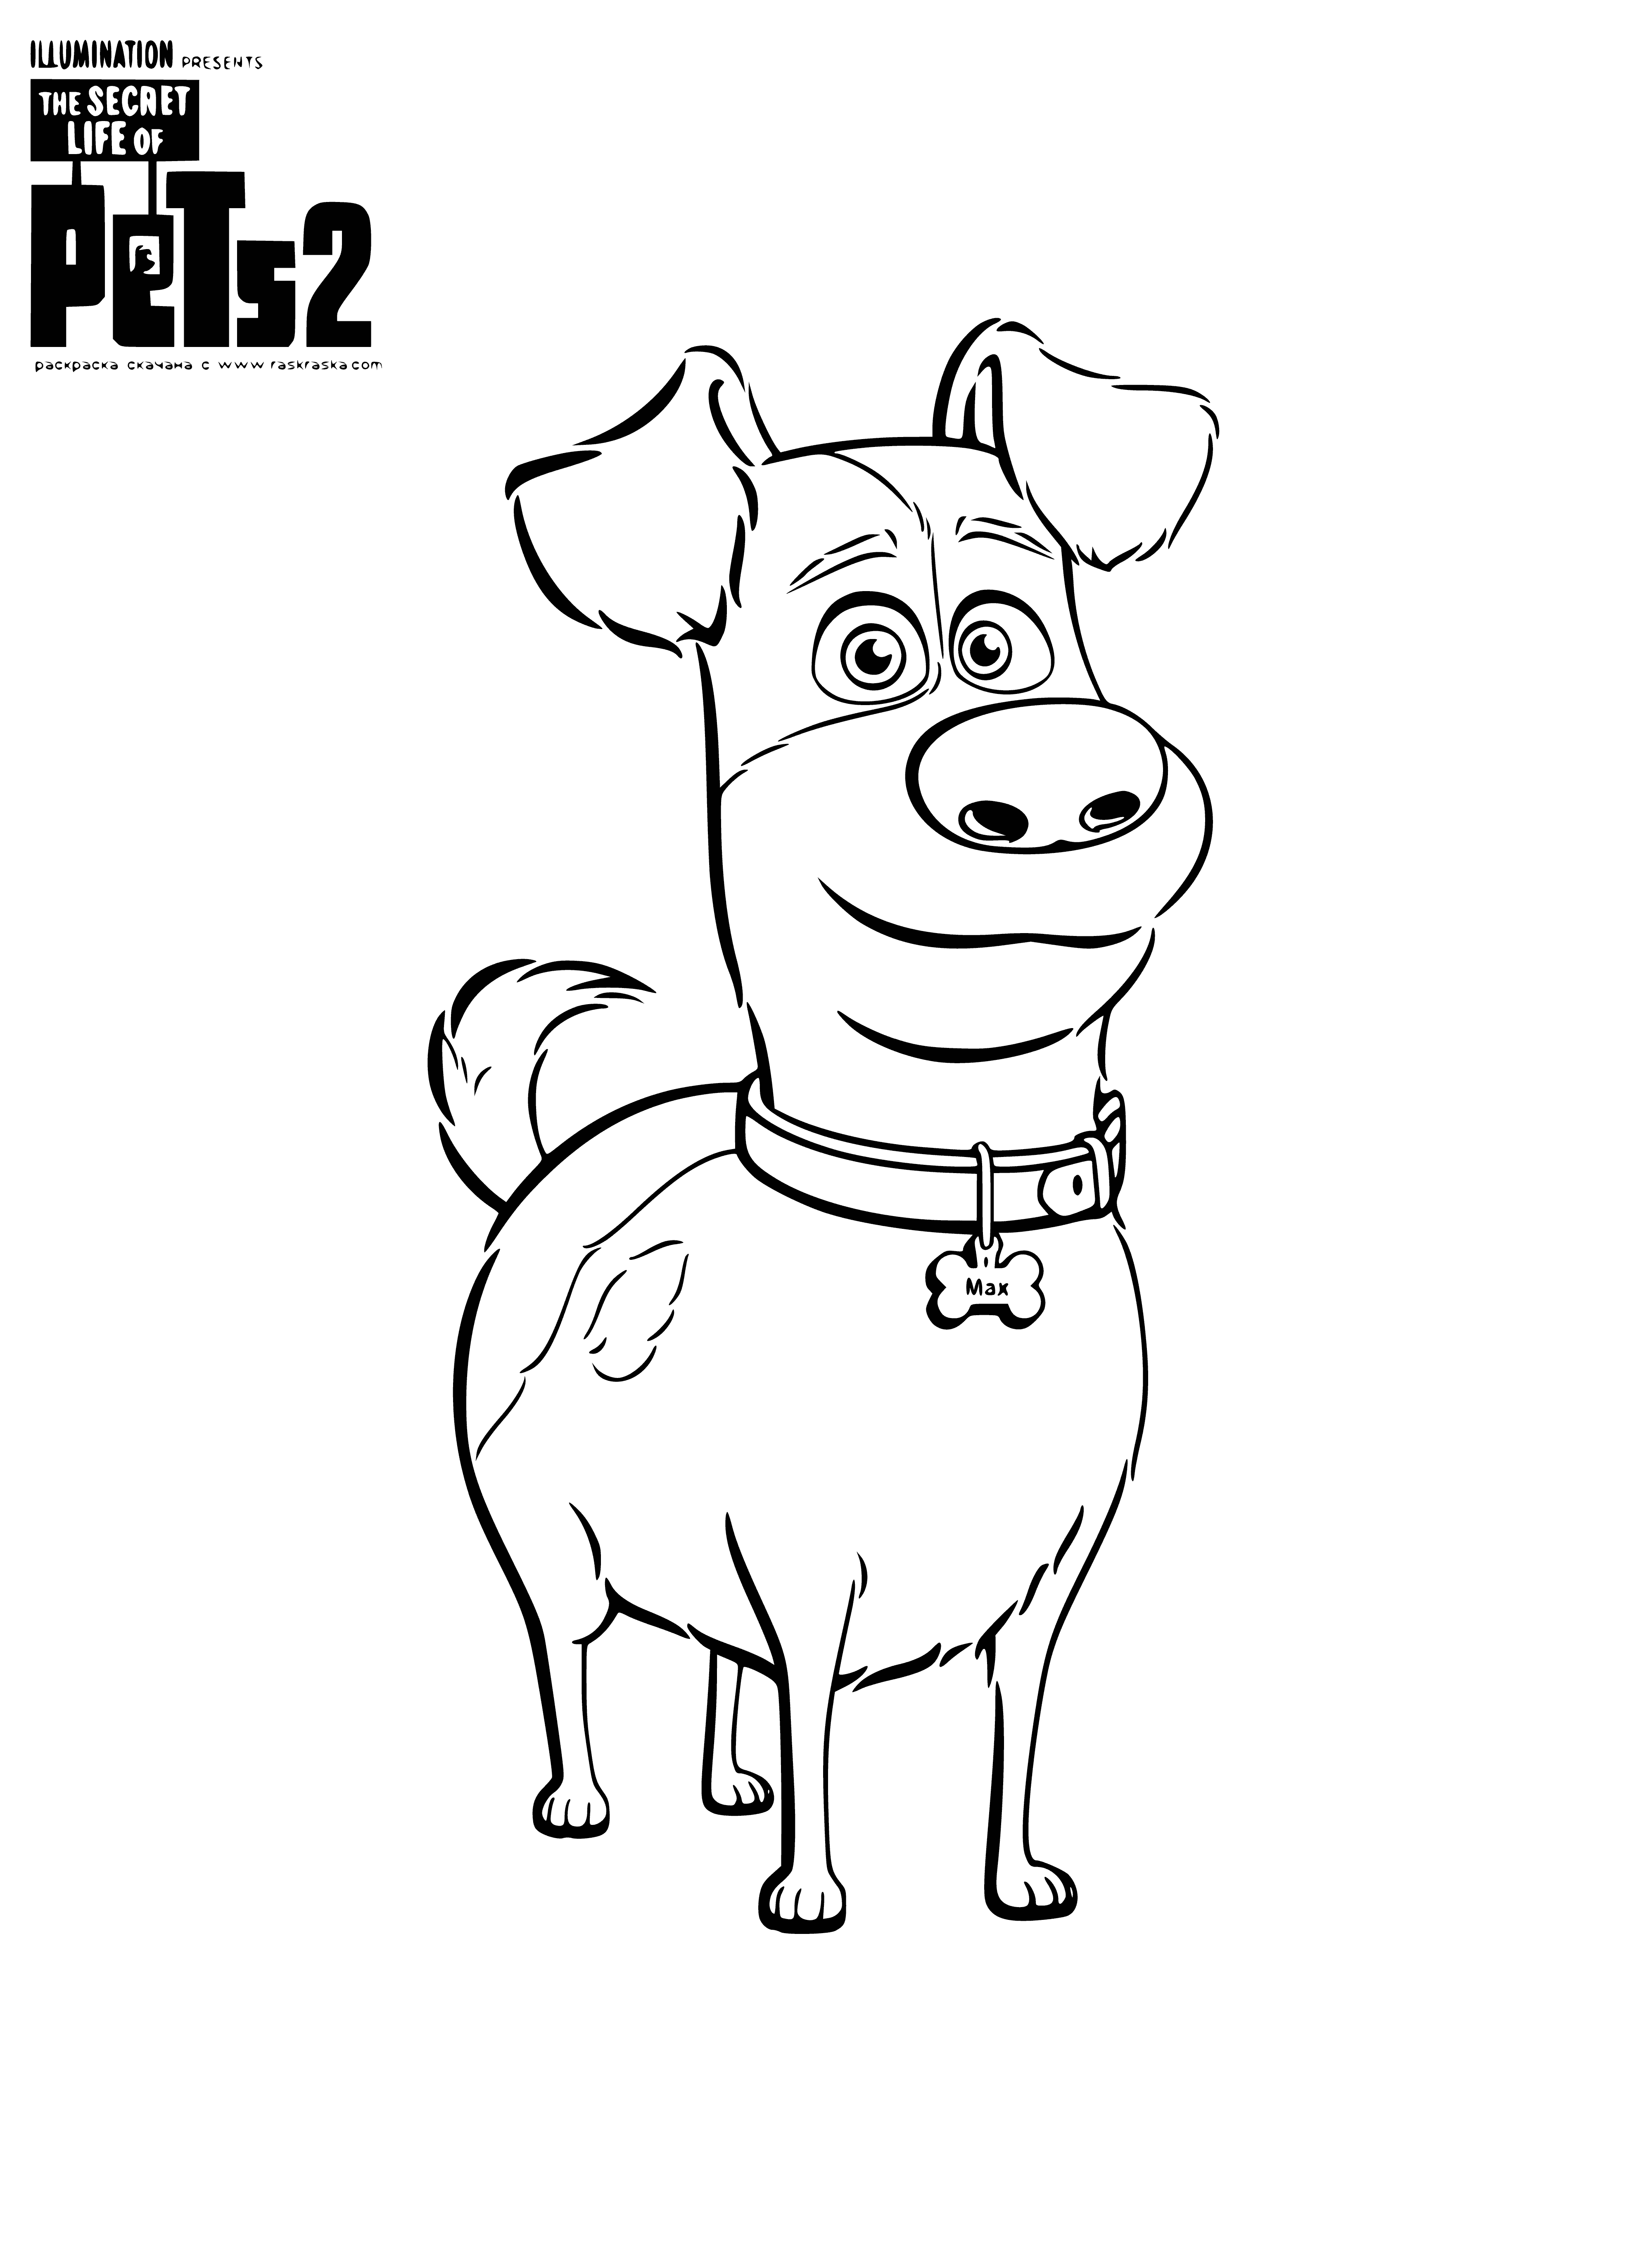 coloring page: Terrier runs joyfully through park, chasing ball thrown by beloved human owner, looking back with pure joy.